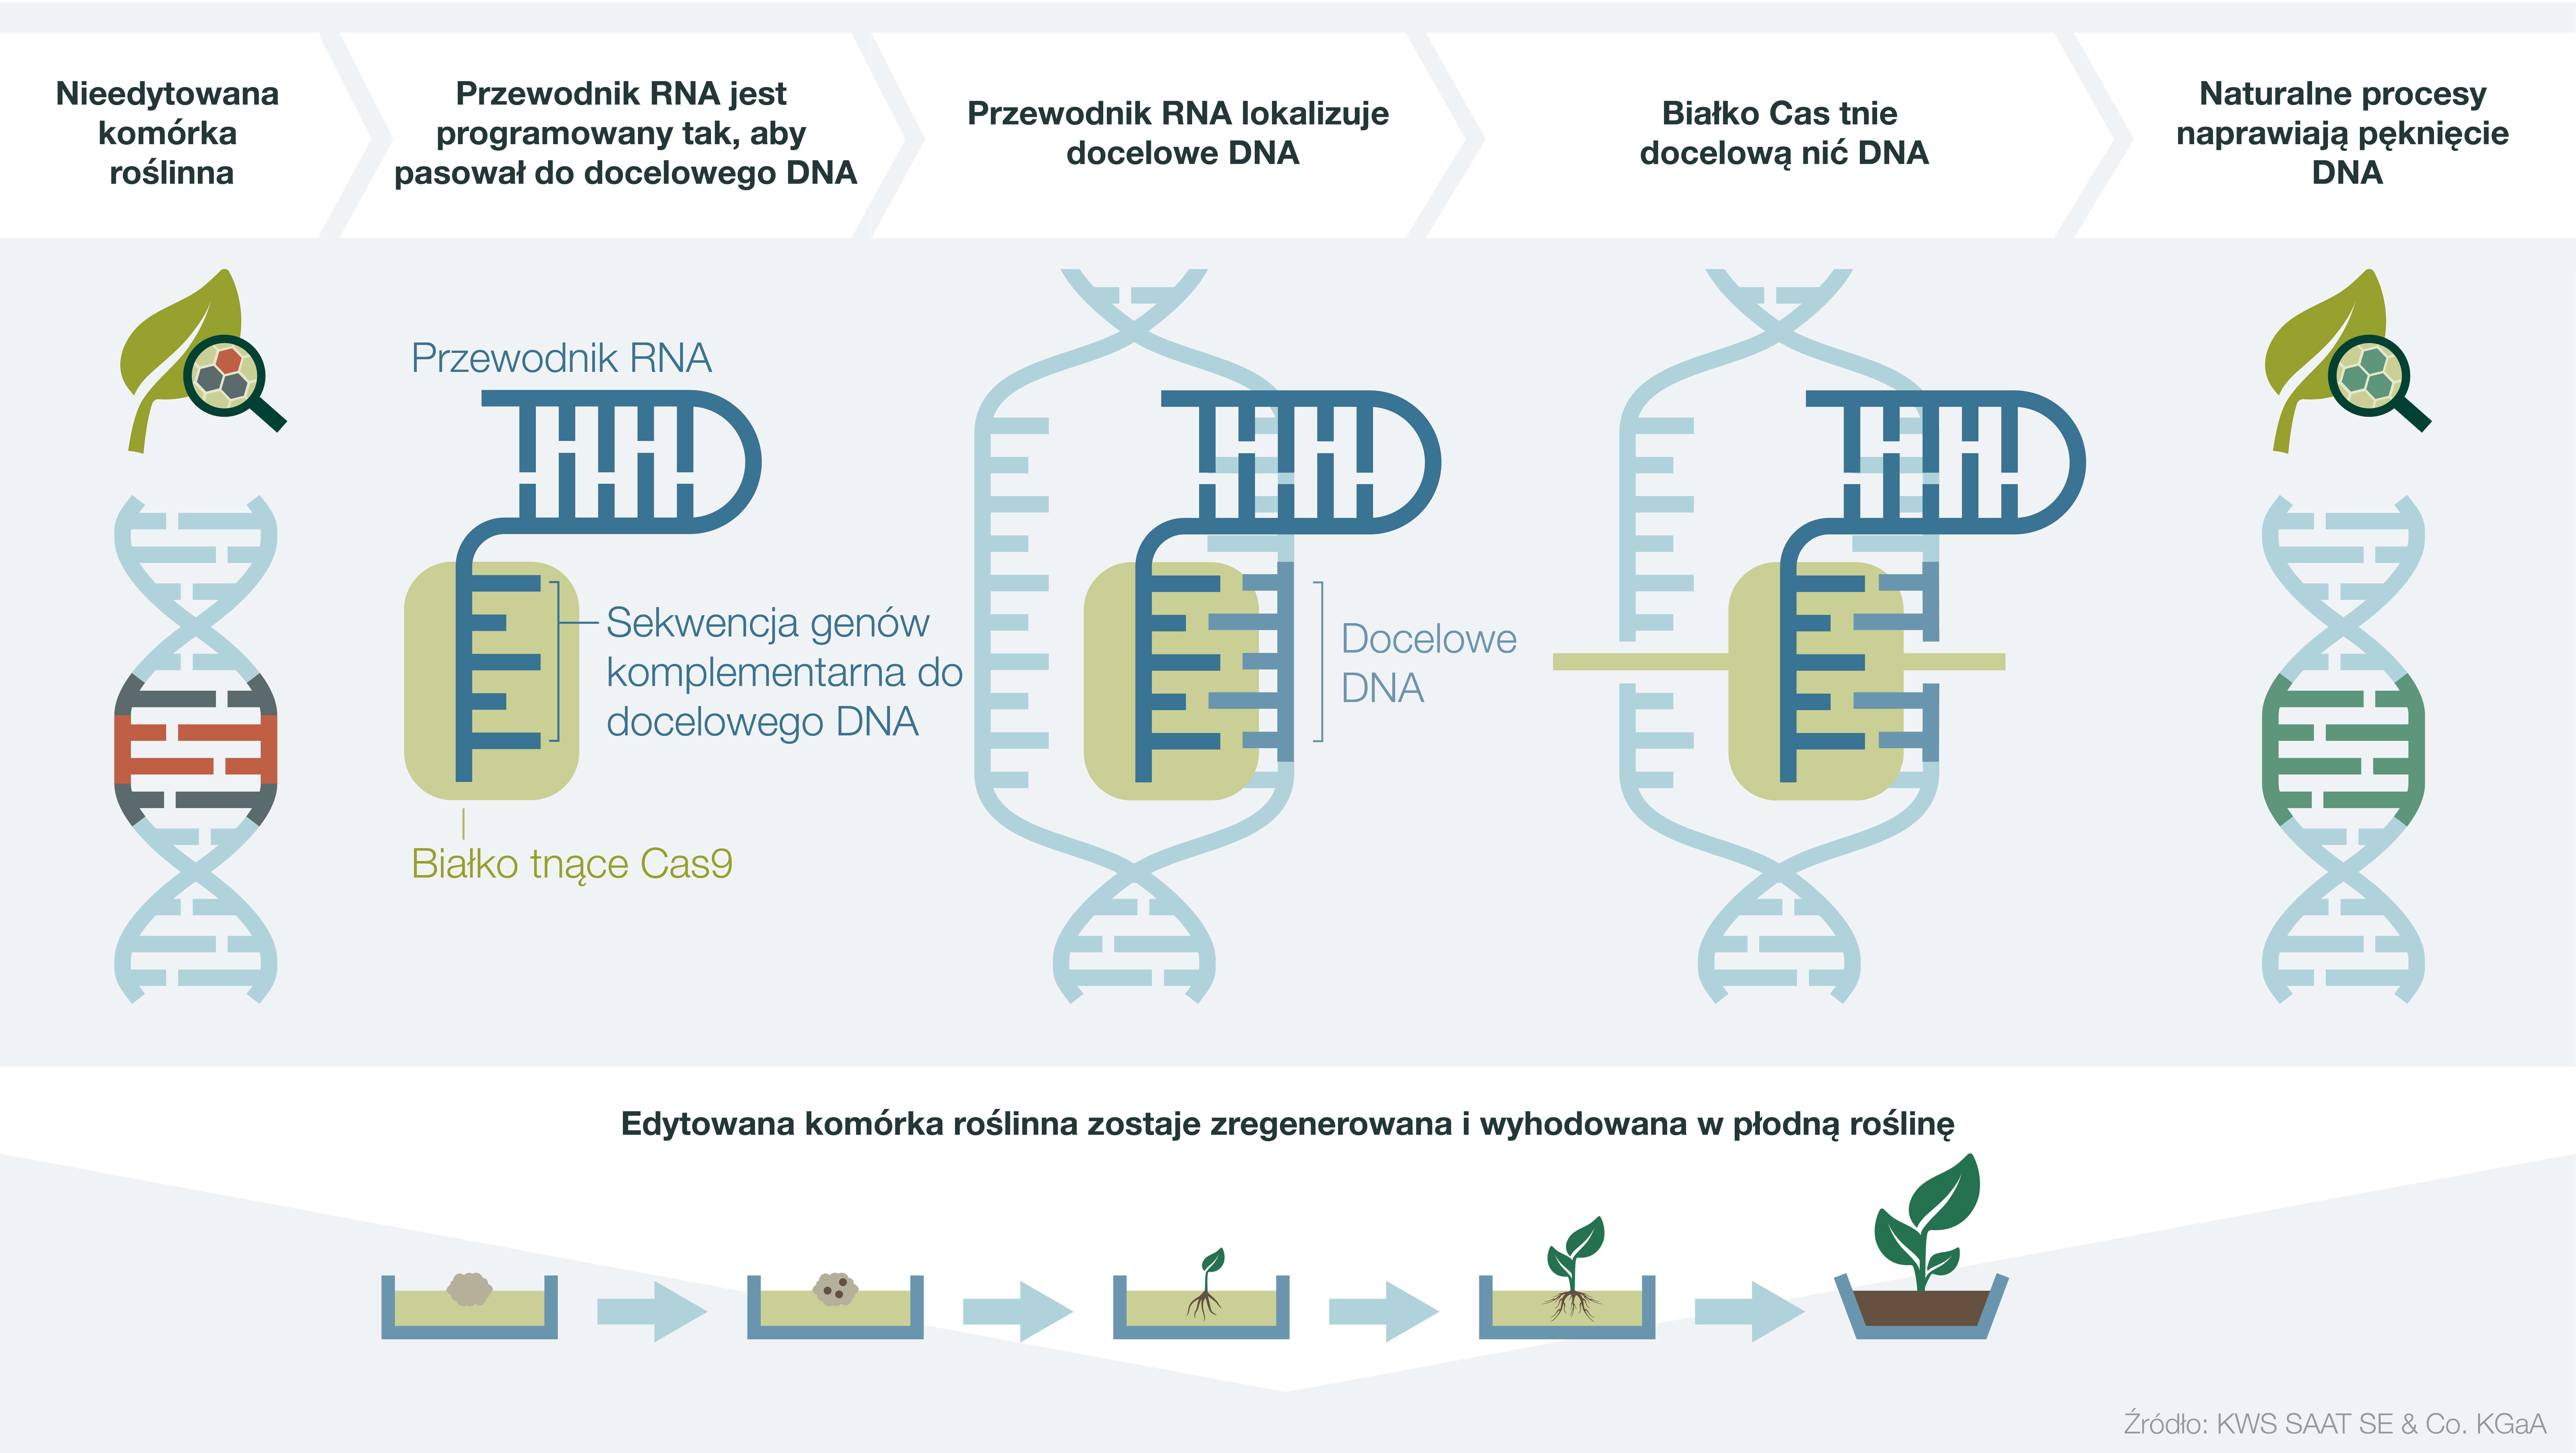 Infographic explaining the process of genome editing in plants using CRISP/Cas